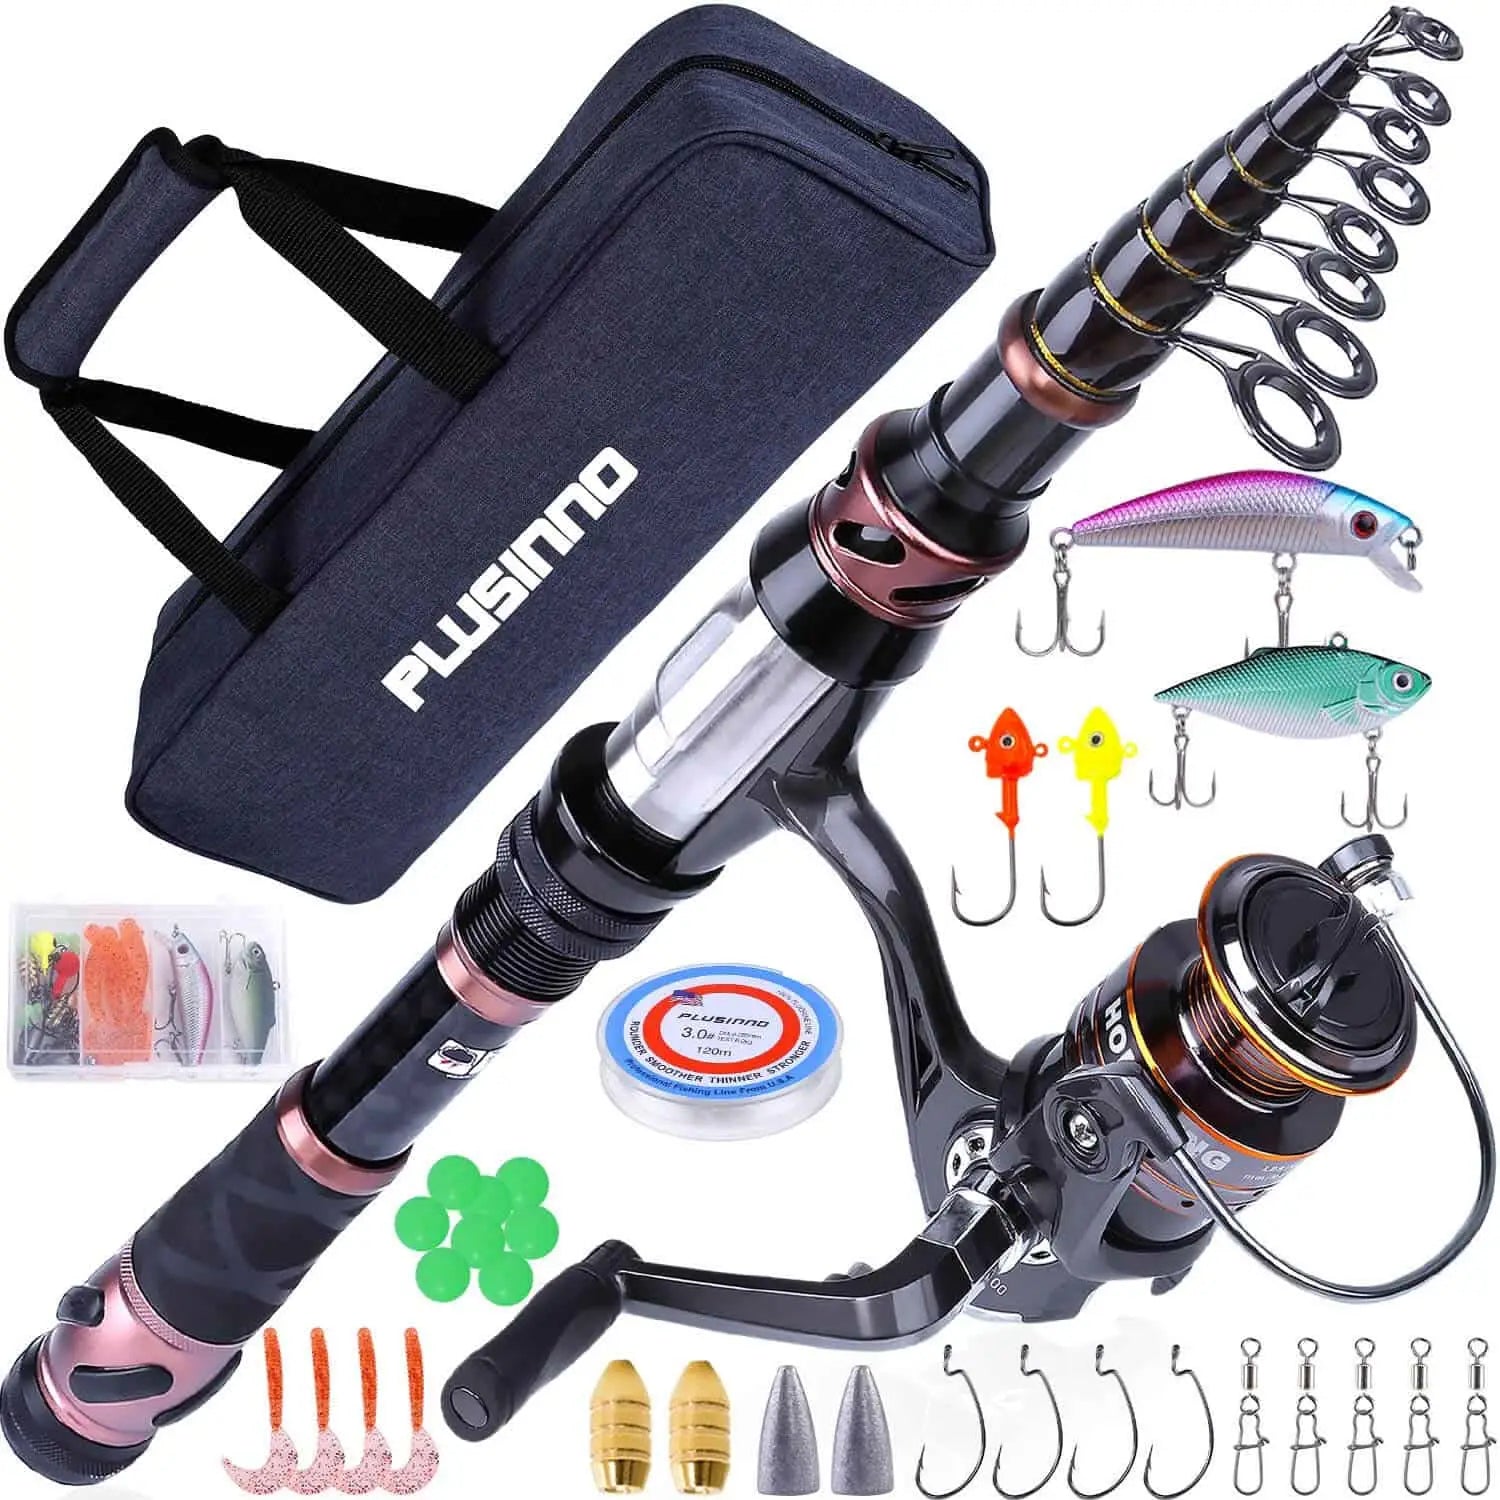 Buy Telescopic Fishing Rod Products Online in Chaguanas at Best